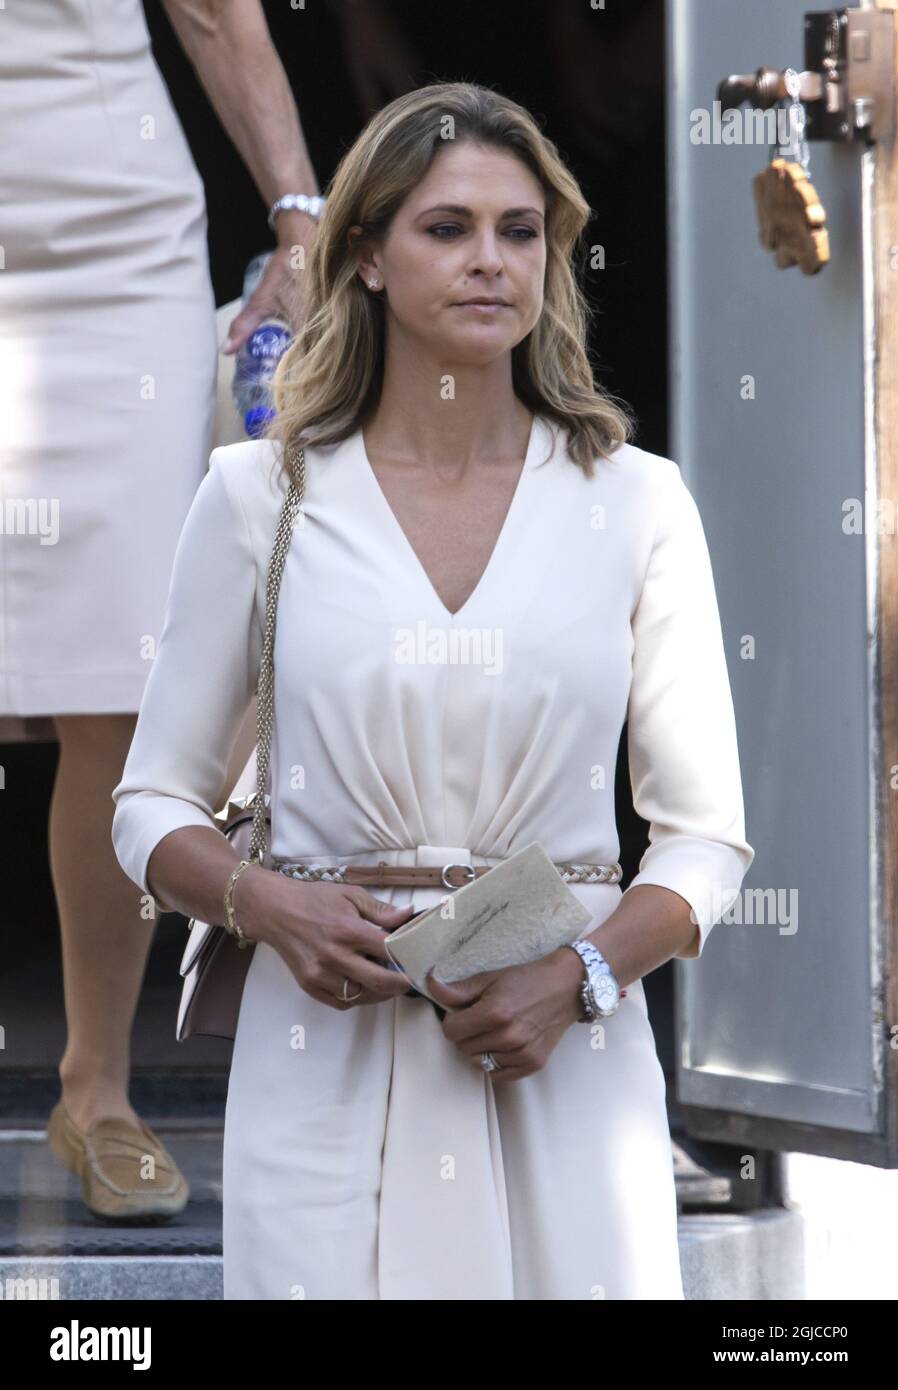 Princesss Madeleine Funeral of Anki Wallenberg in Dalaro church, Stockholm, Sweden 19 July 2019 Anki Wallenberg died in a sailing accident on the lake Geneva. She resided in London and was a close friend to the Swedish Royal Family. (c) Patrik Ã–sterberg / TT / kod 2857  Stock Photo